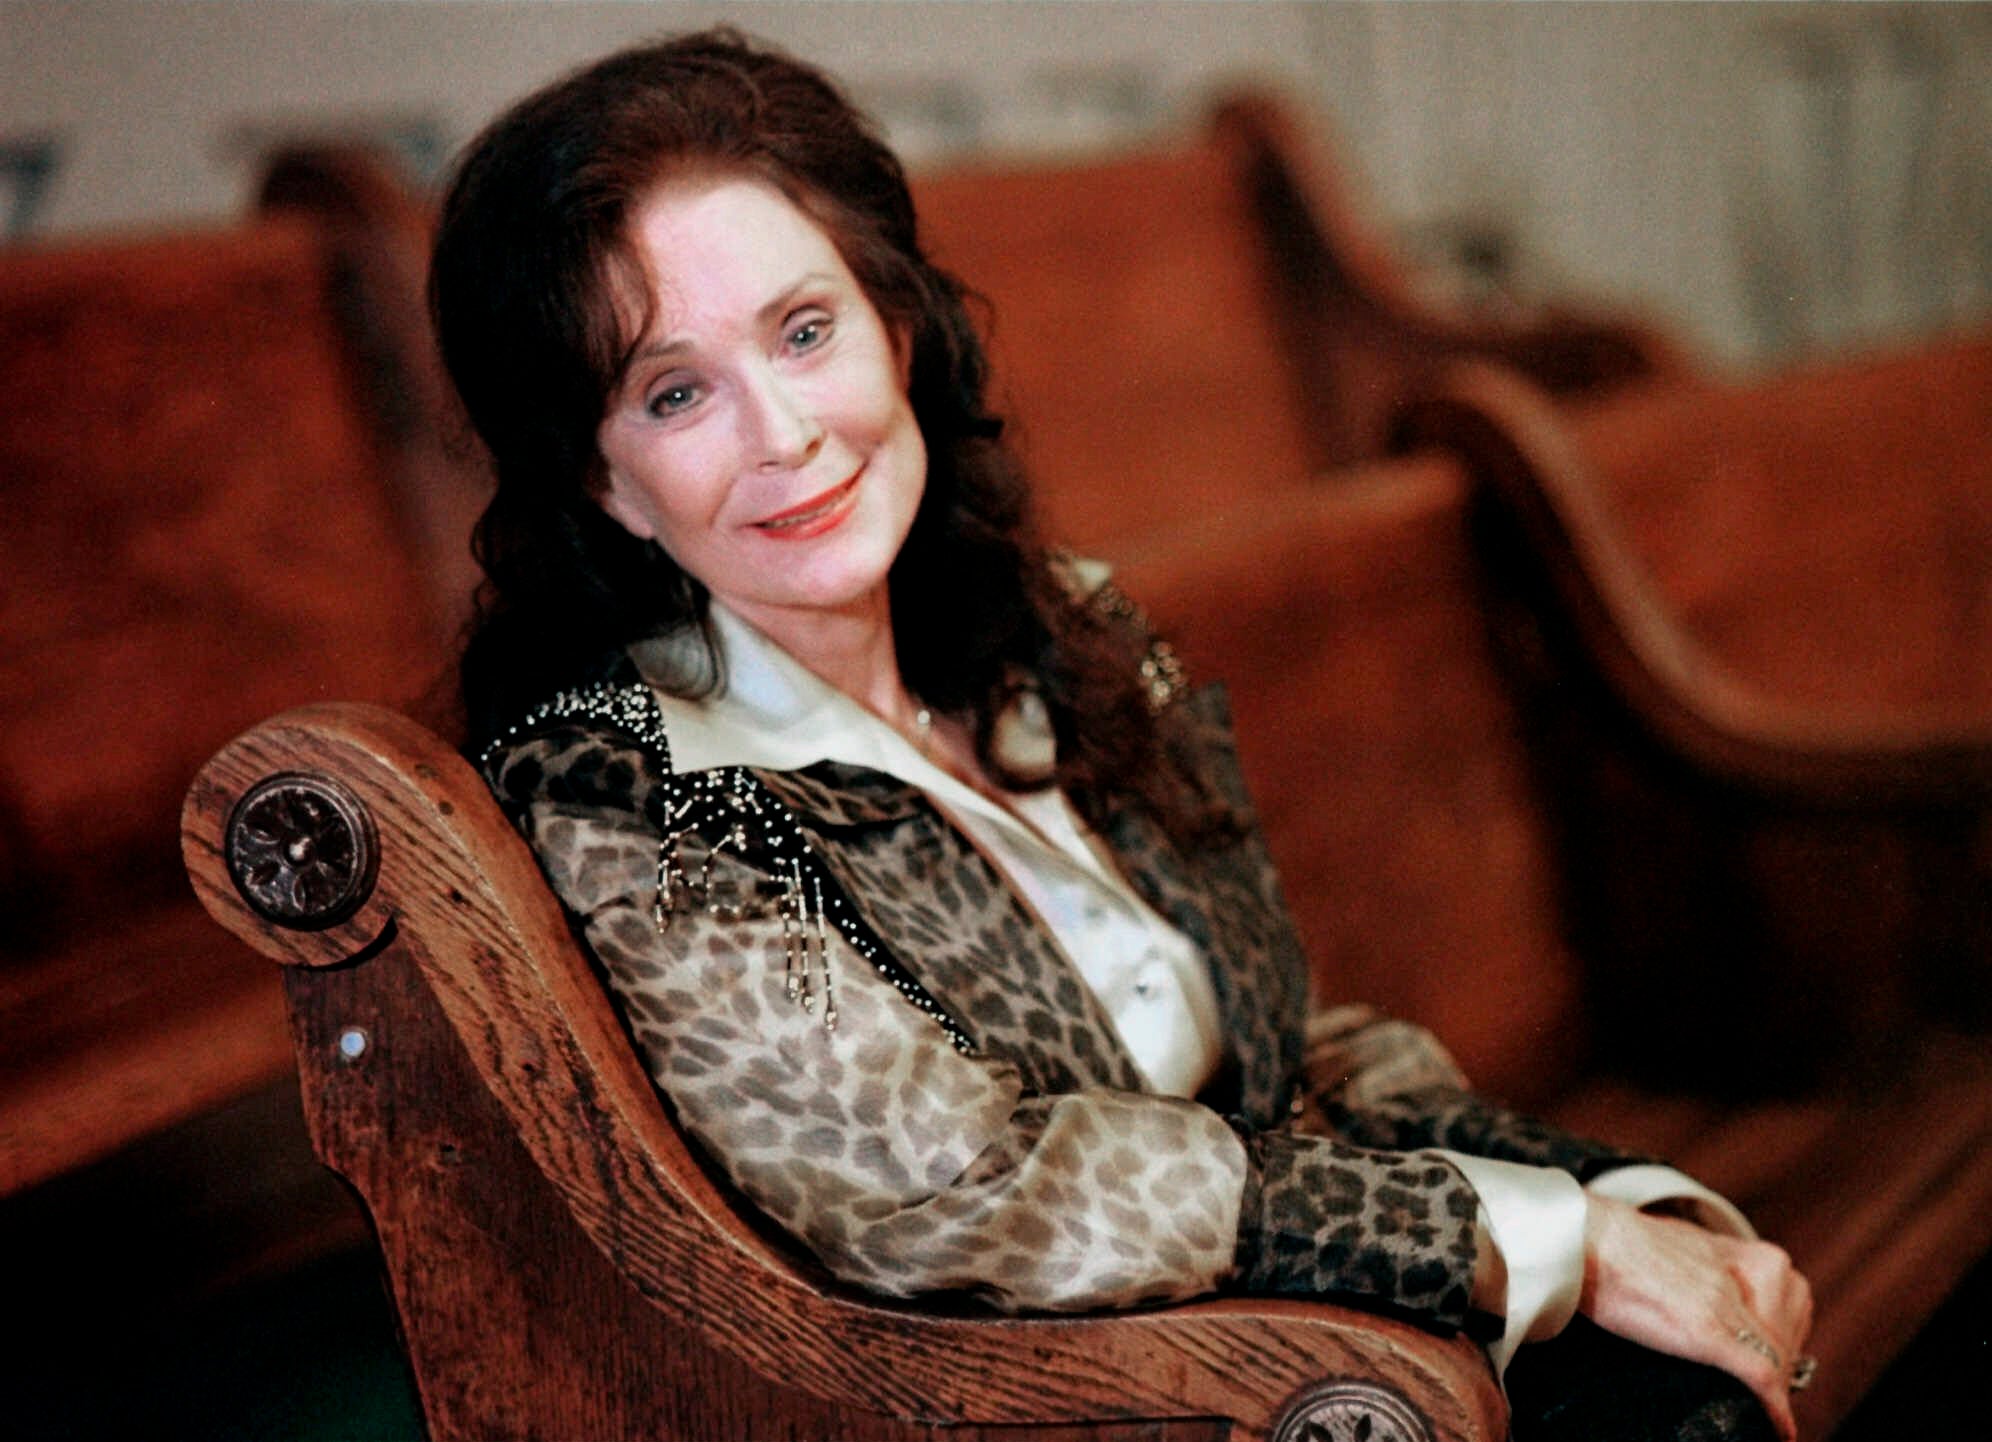 Loretta Lynn, coal miners daughter and country queen, dies